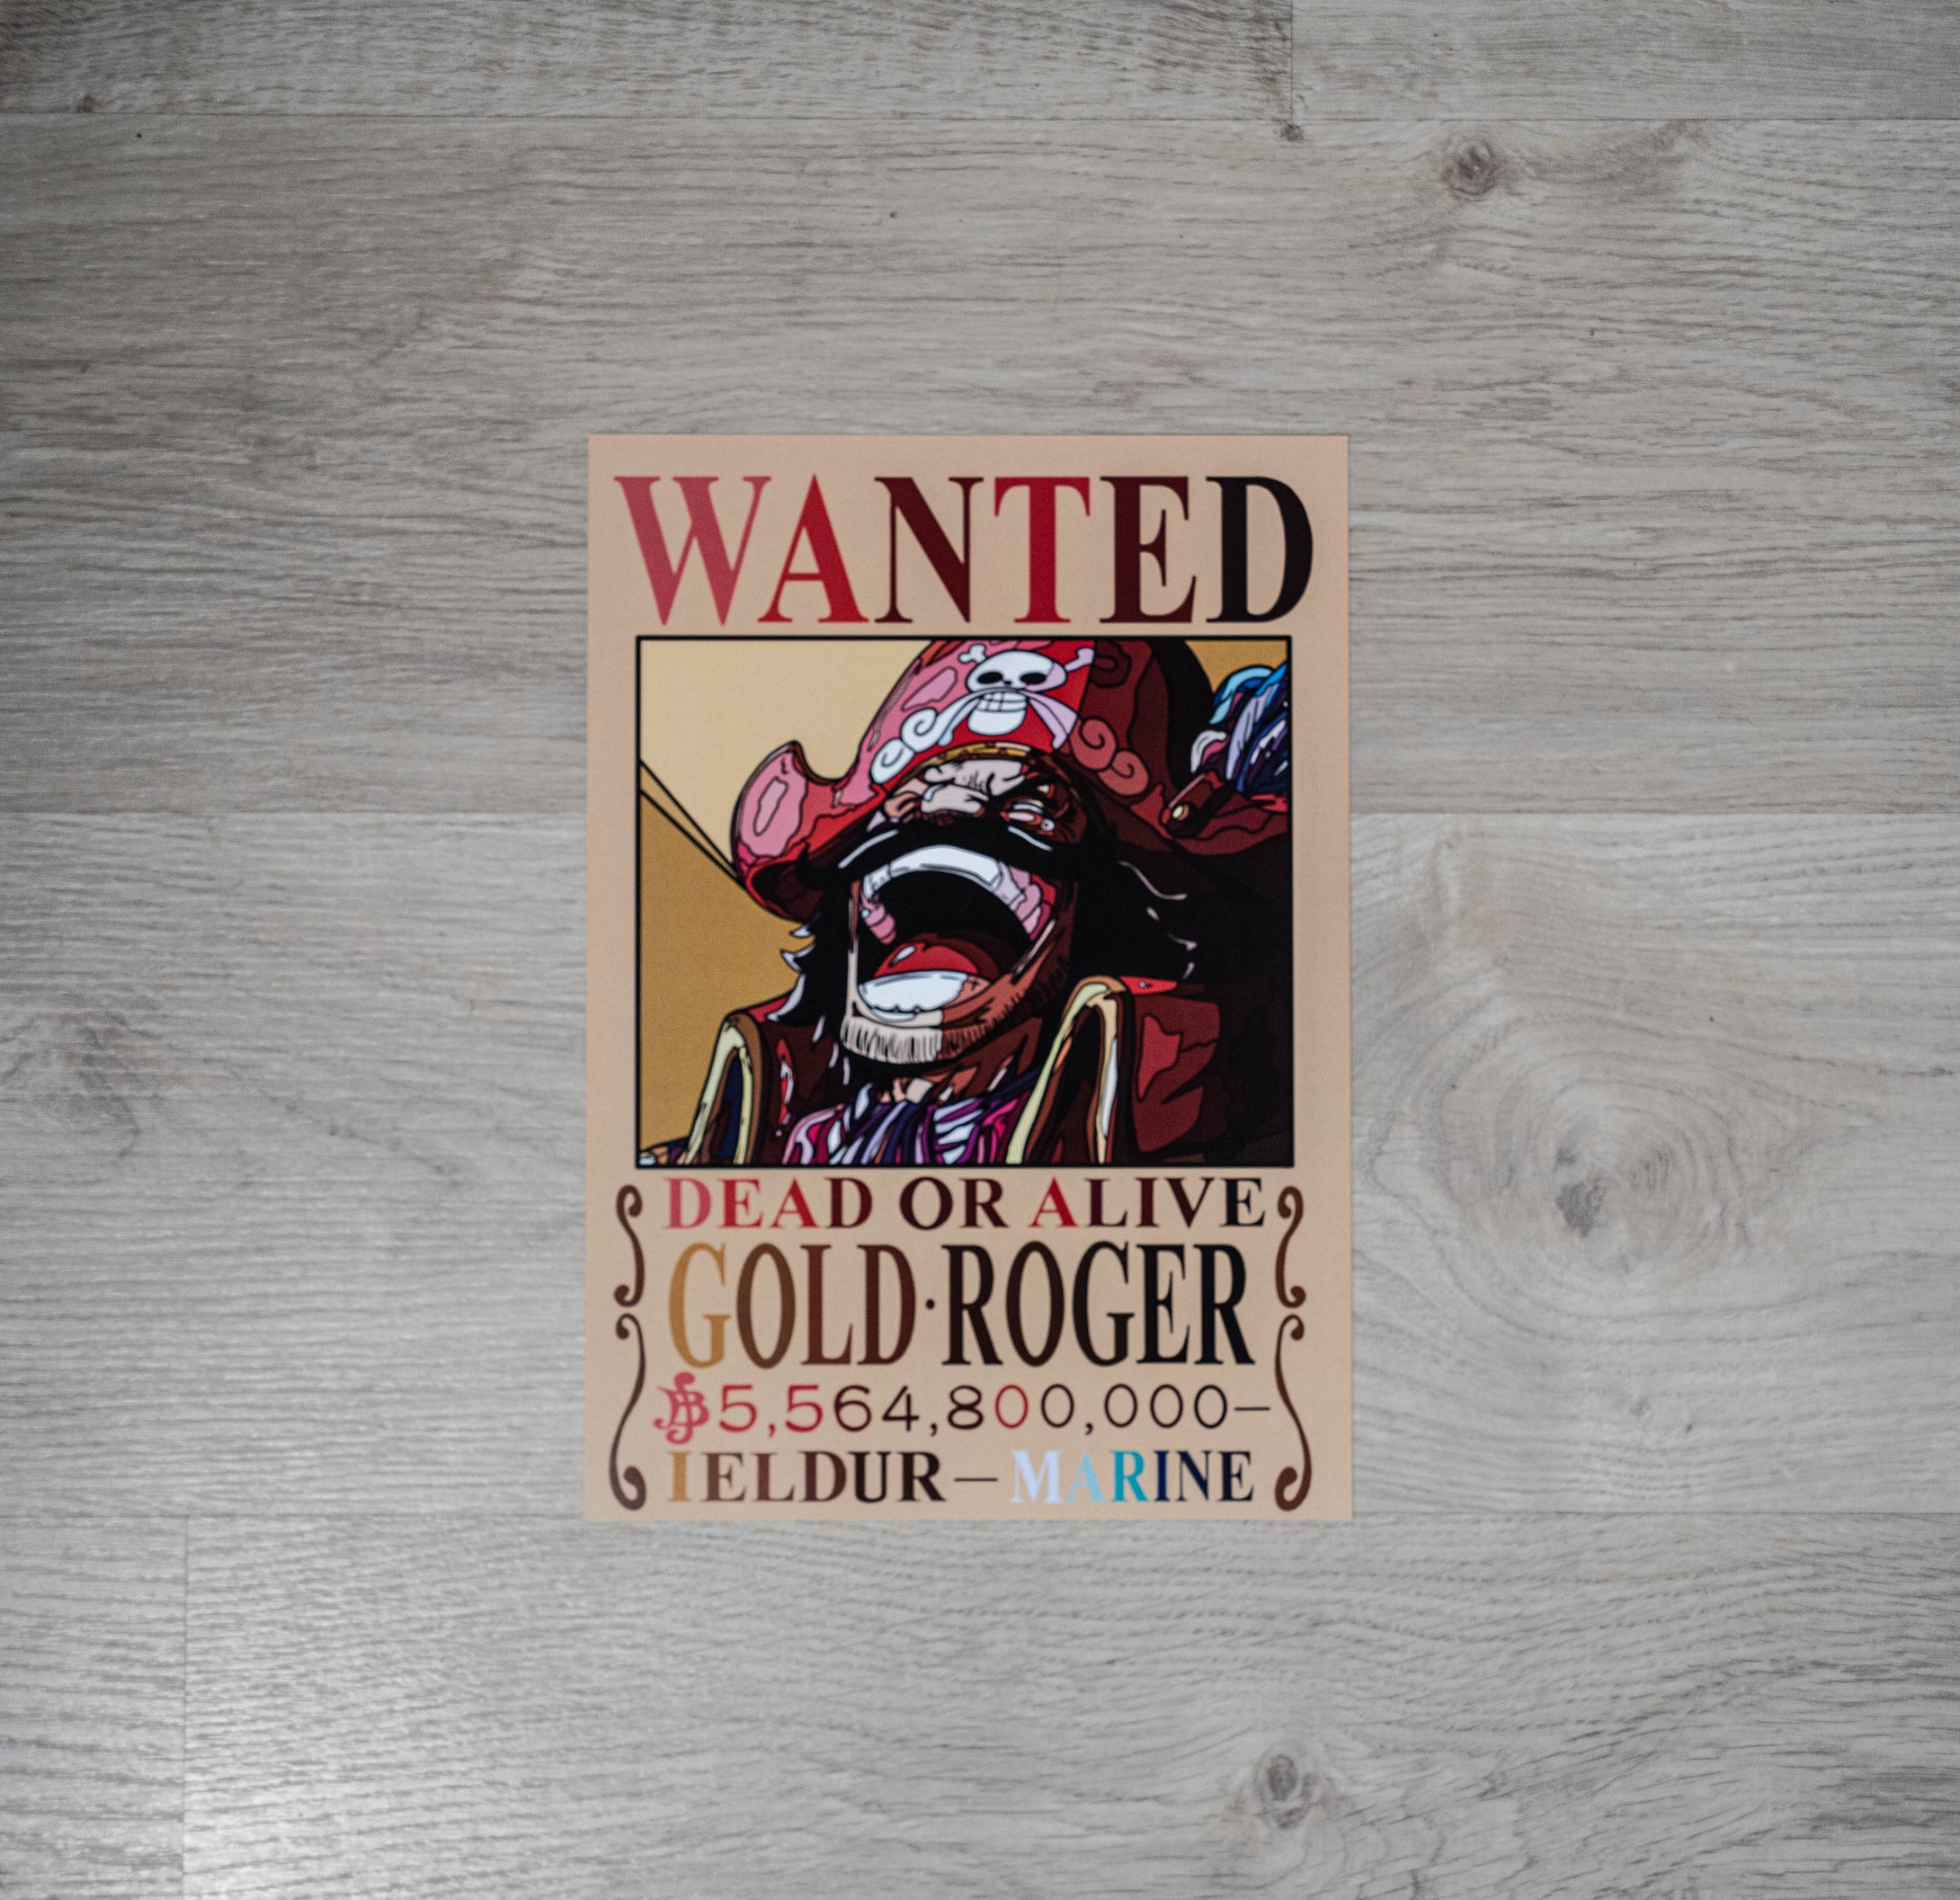 Cartel Wanted Gold D. Roger - One Piece